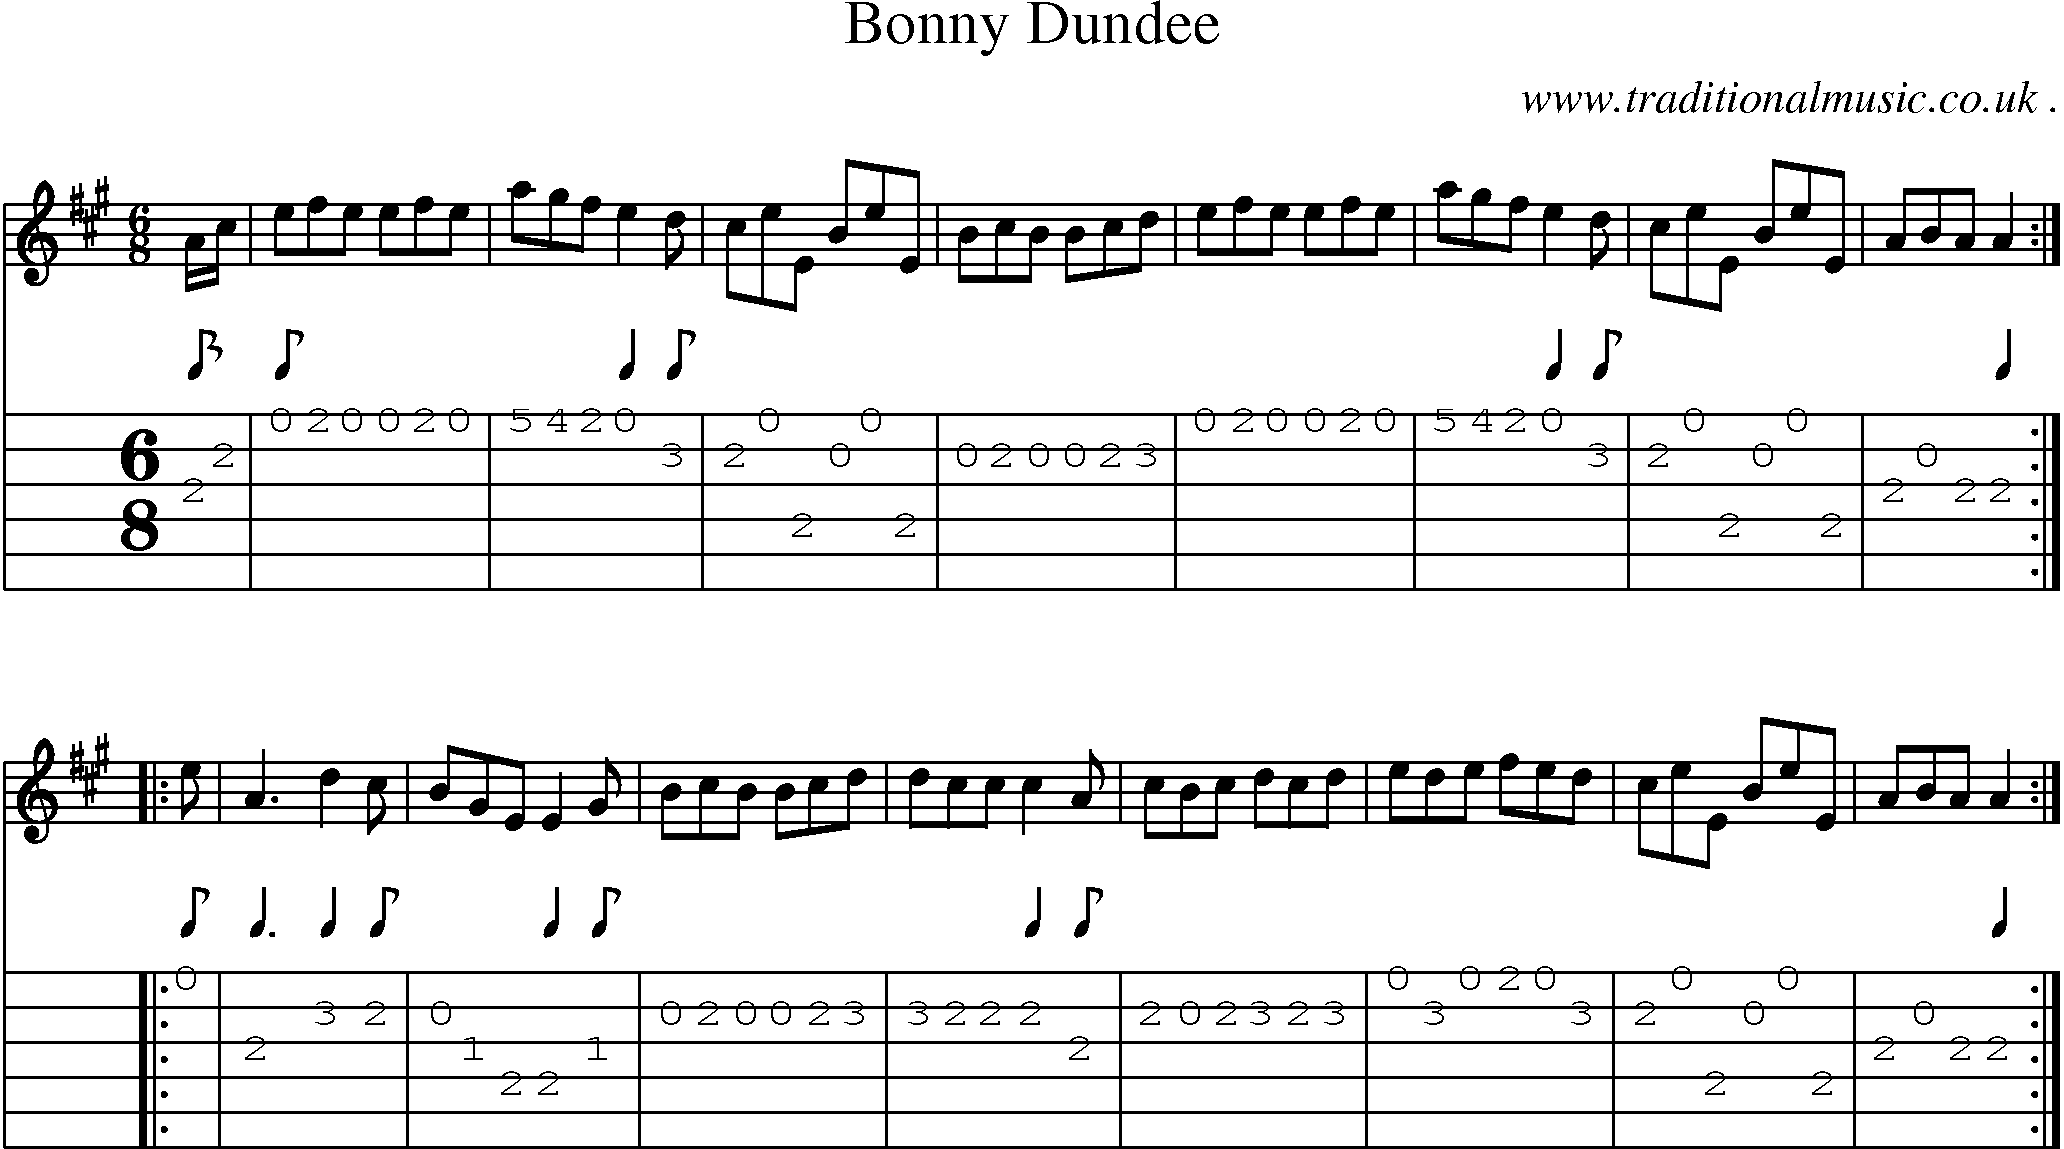 Sheet-music  score, Chords and Guitar Tabs for Bonny Dundee